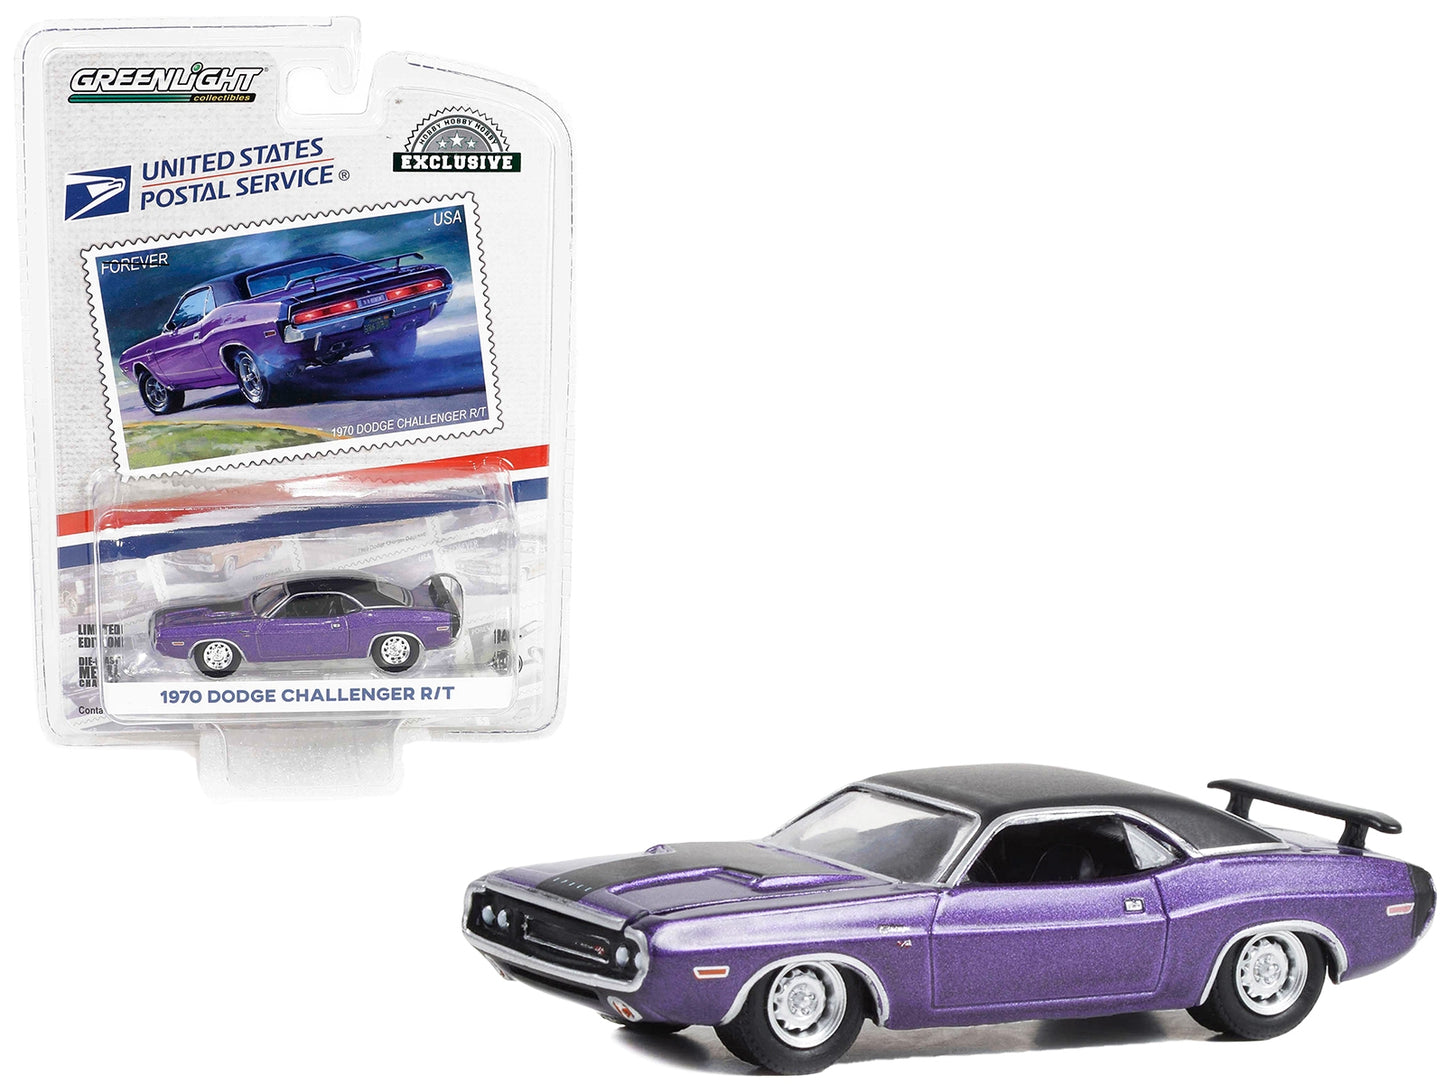 1970 Dodge Challenger R/T Purple Metallic with Matt Black Top USPS (United States Postal Service) "2022 Pony Car Stamp Collection by Artist Tom Fritz" "Hobby Exclusive" Series 1/64 Diecast Model Car by Greenlight